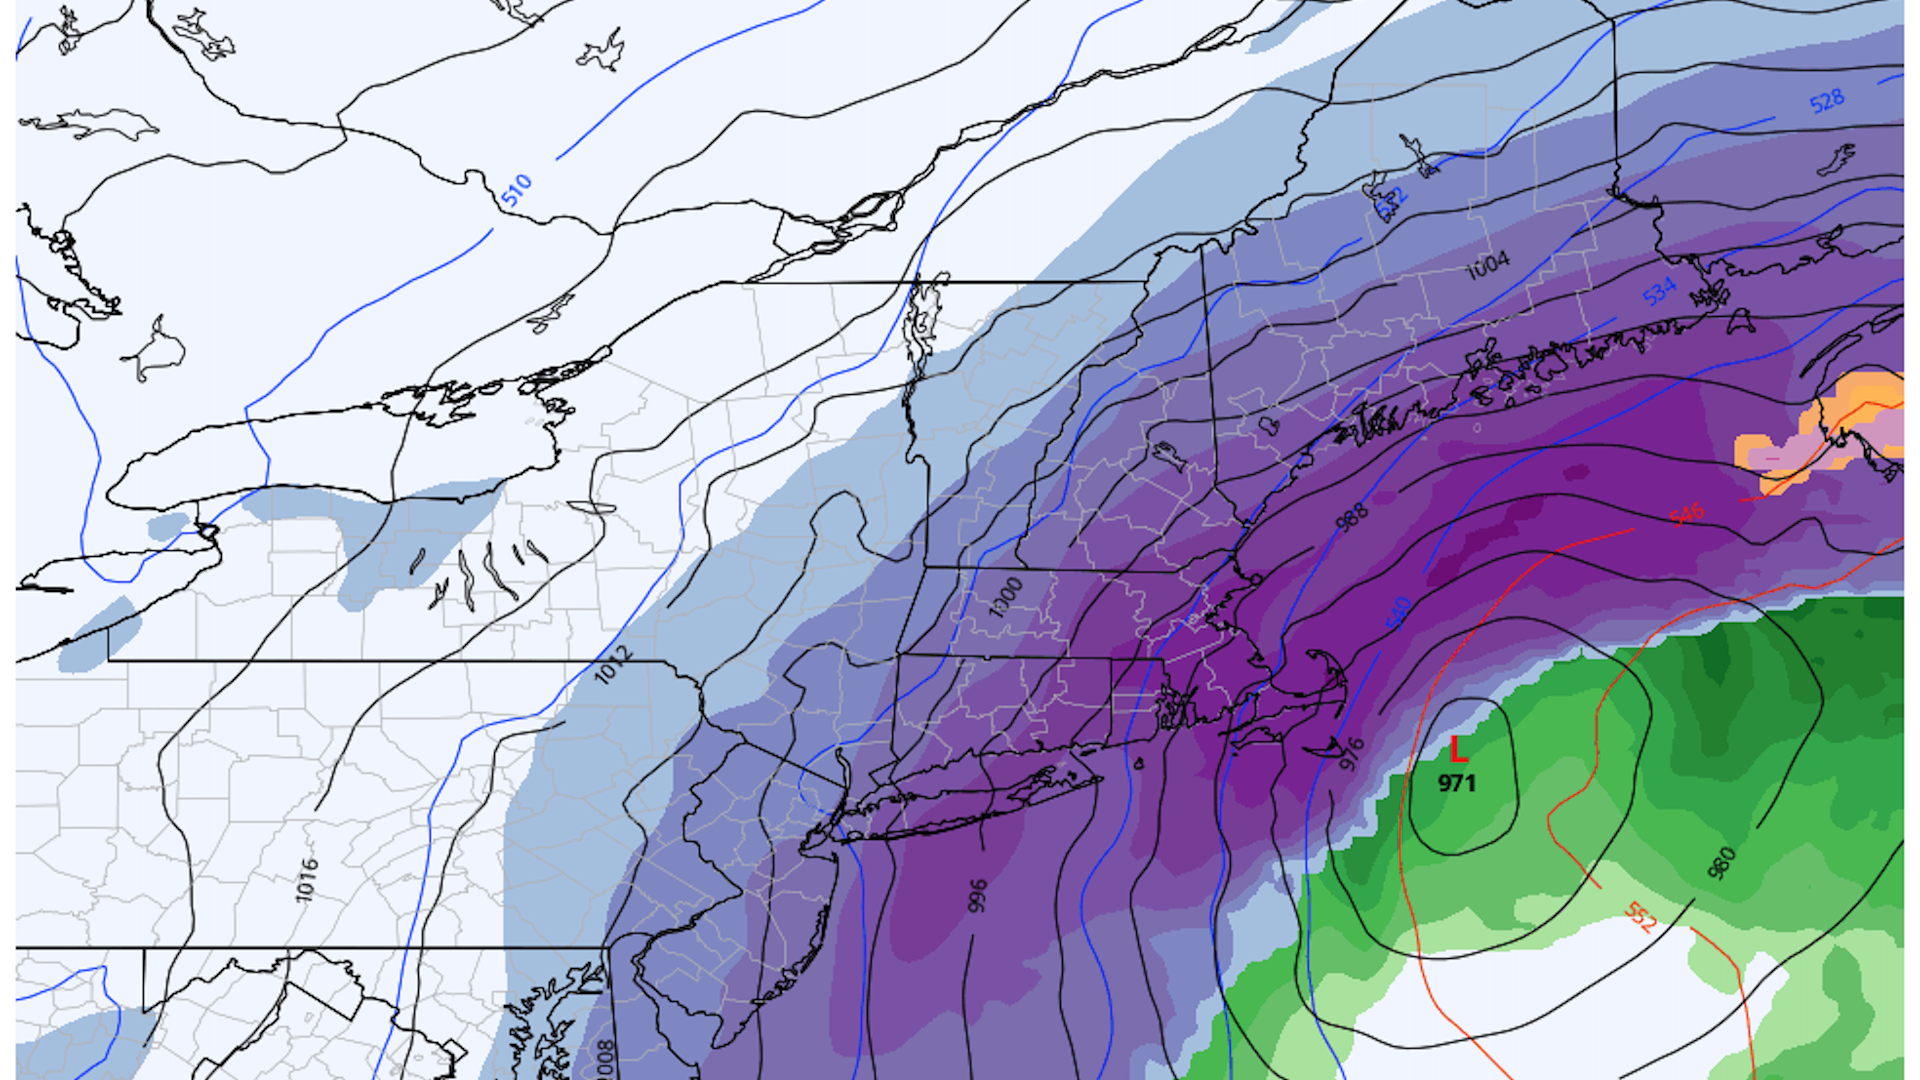 Computer model projection of the New England blizzard on Saturday, Jan. 29, 2022.